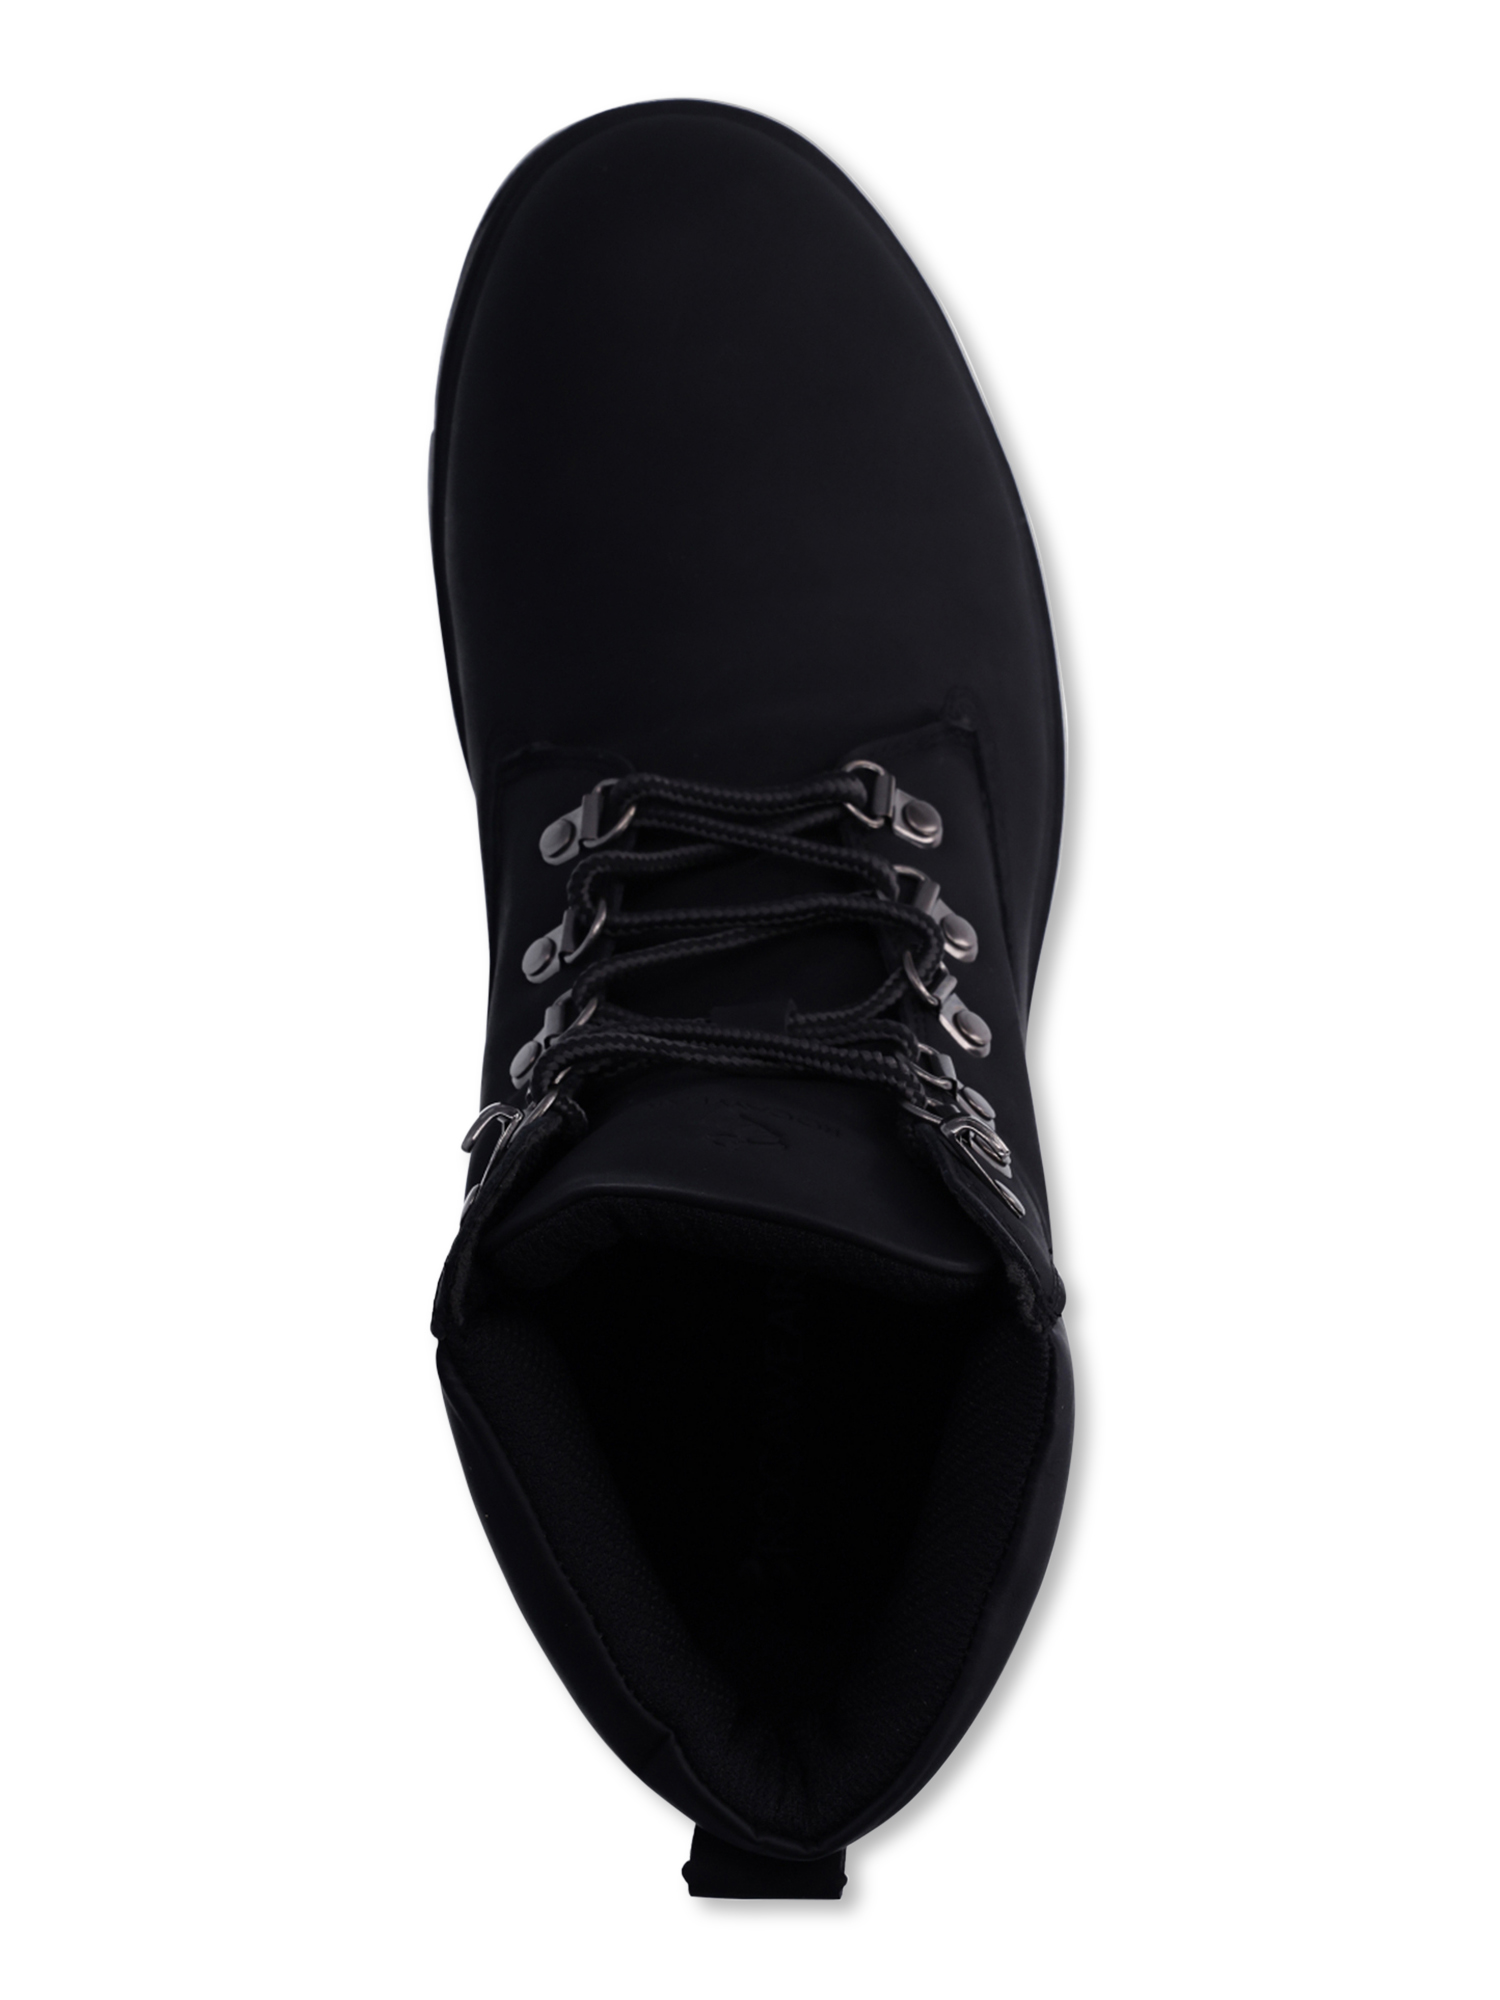 Rocawear Men's Austin Lace Up Boots - image 4 of 5